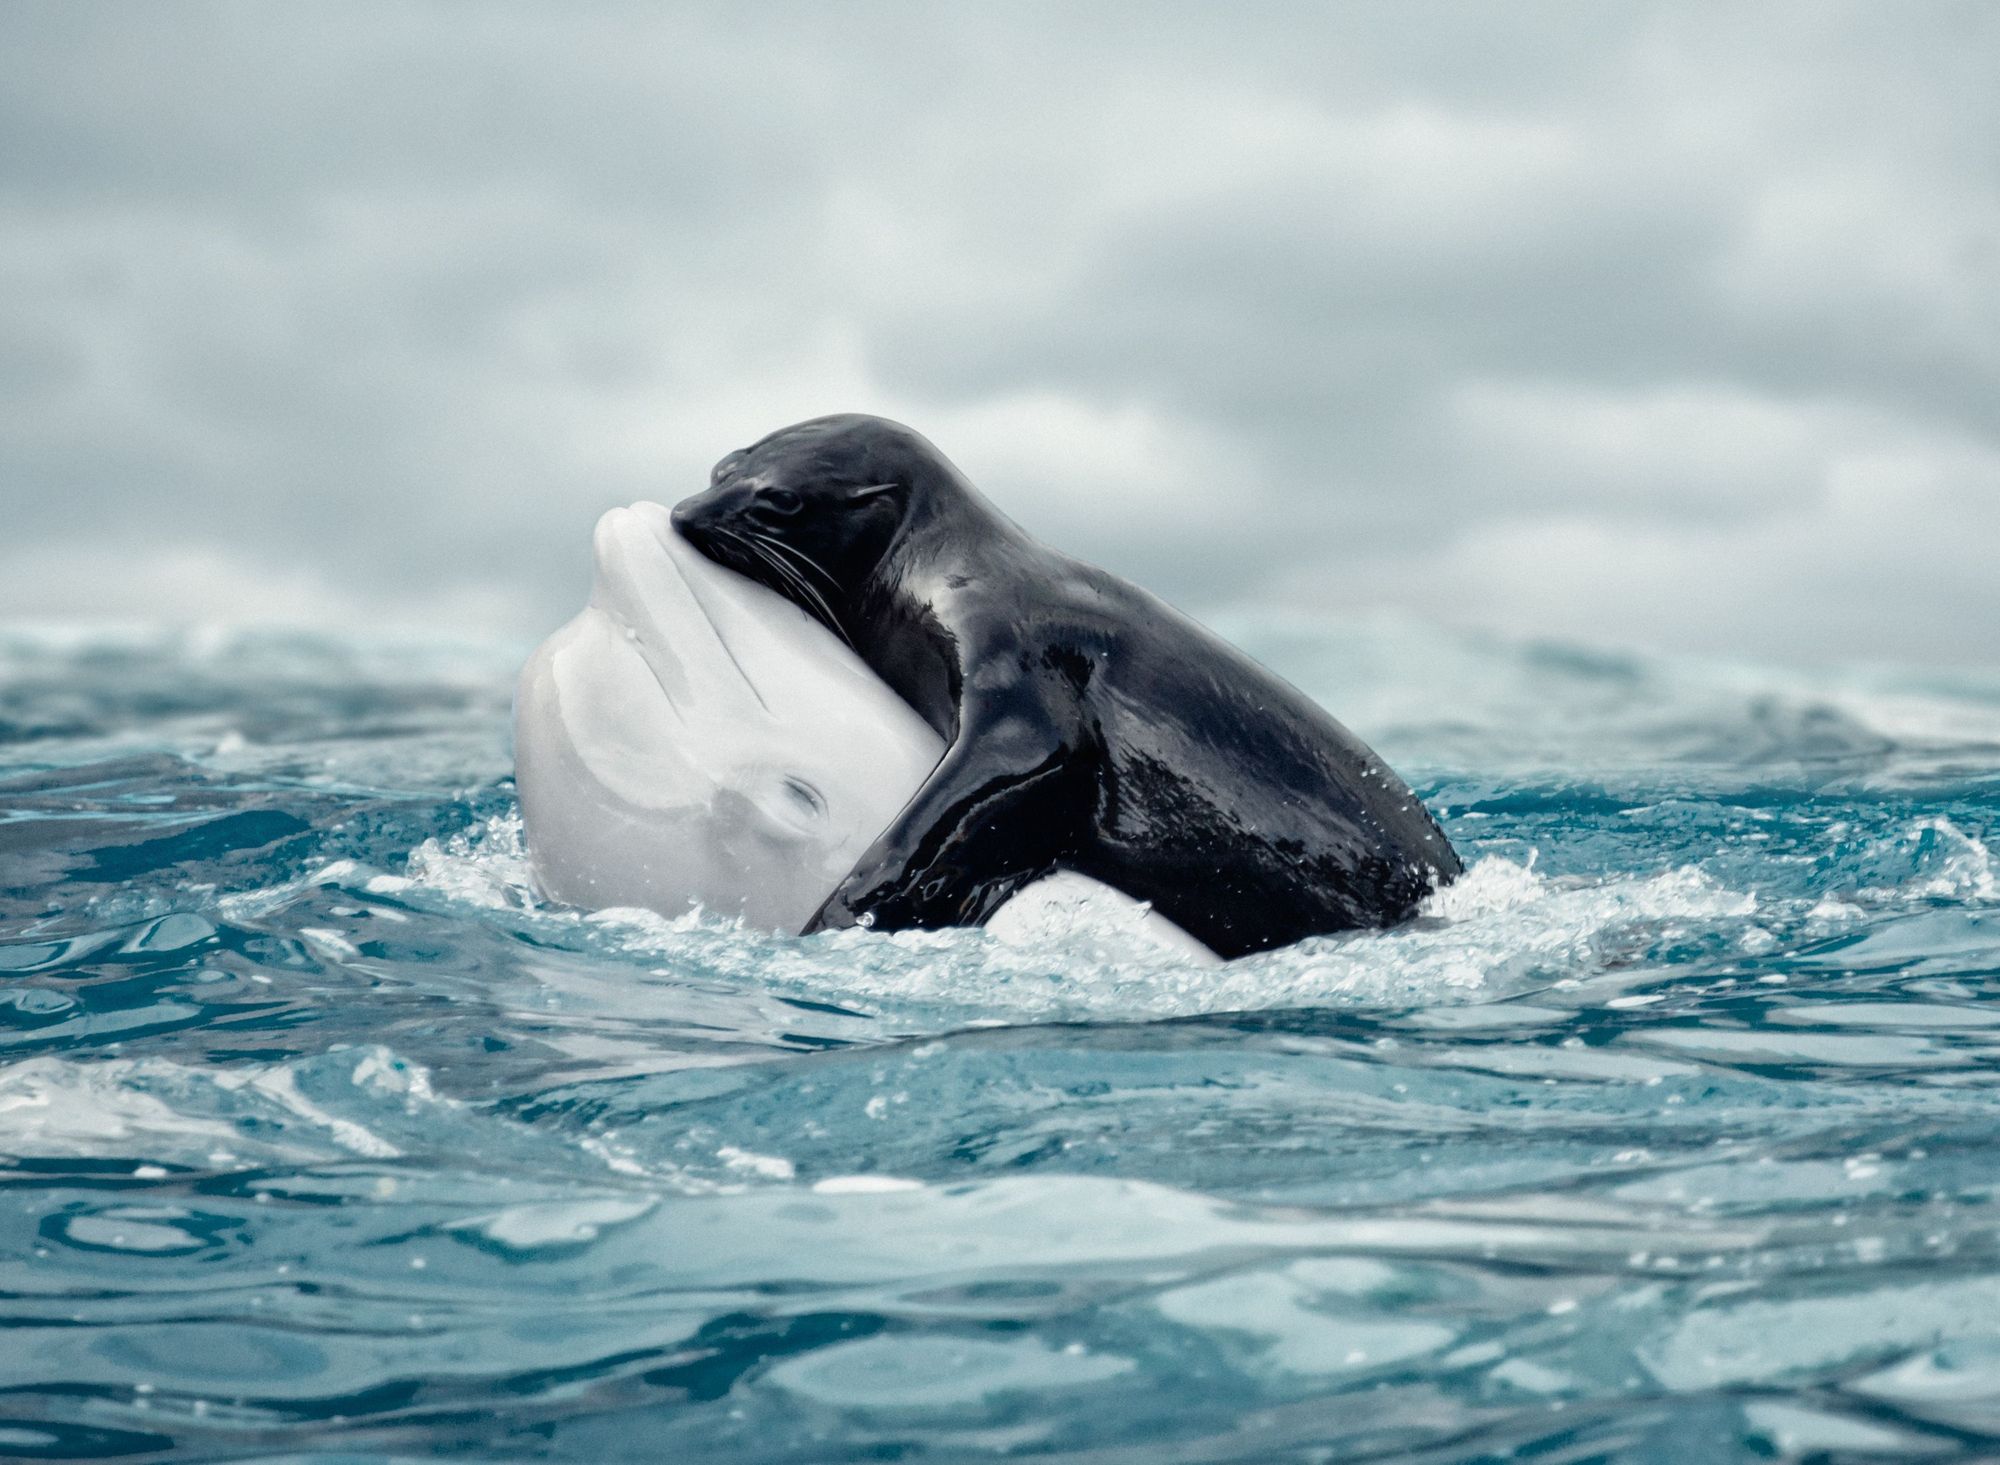 A beluga whale and seal embracing.